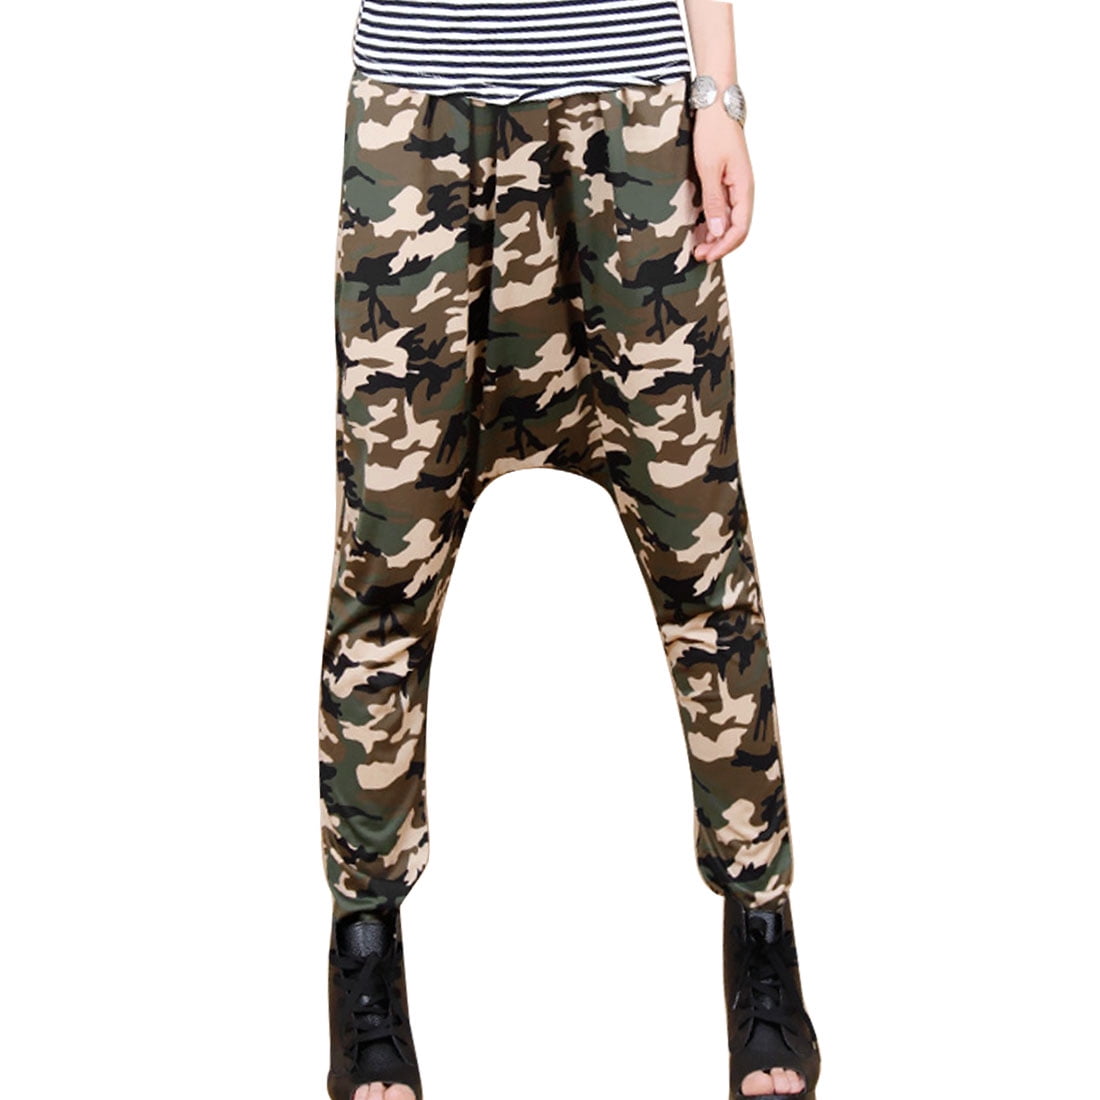 Women's Camouflage Pattern Elastic Waist Casual Harem Pants Army Green ...